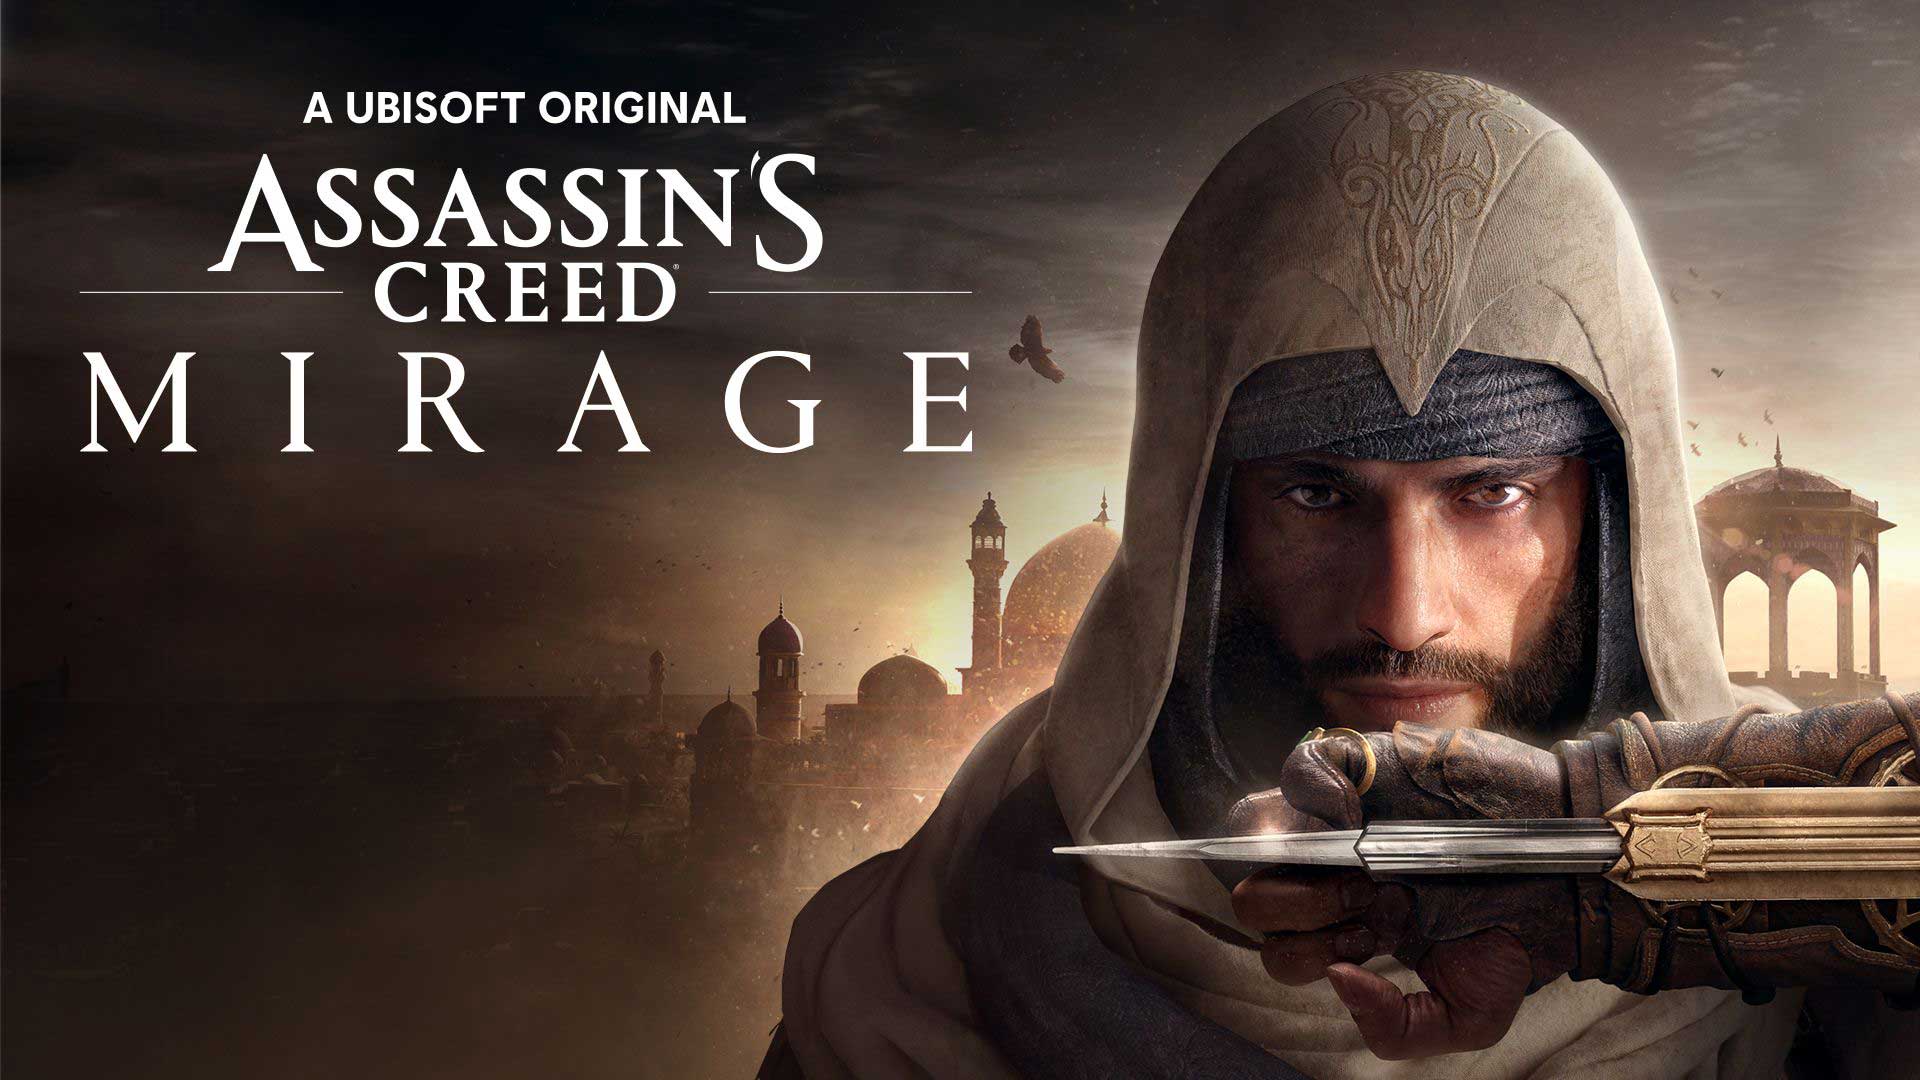 Assassin’s Creed Mirage, This Is Ur Game, thisisurgame.com